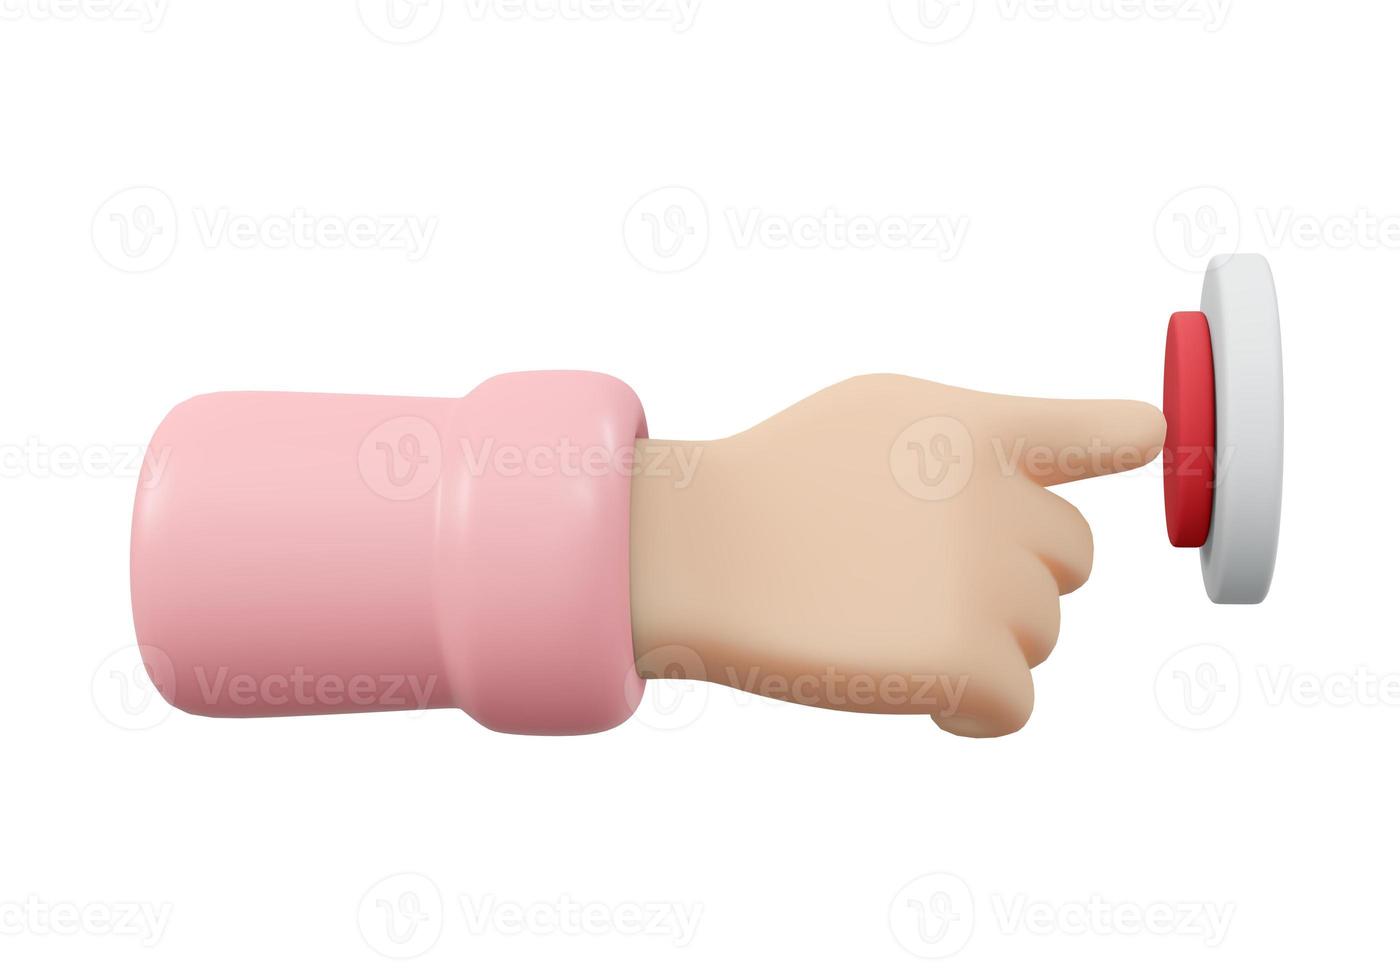 3D Rendering of hand pushing button isolate on white background. 3D Render illustration cartoon style. photo